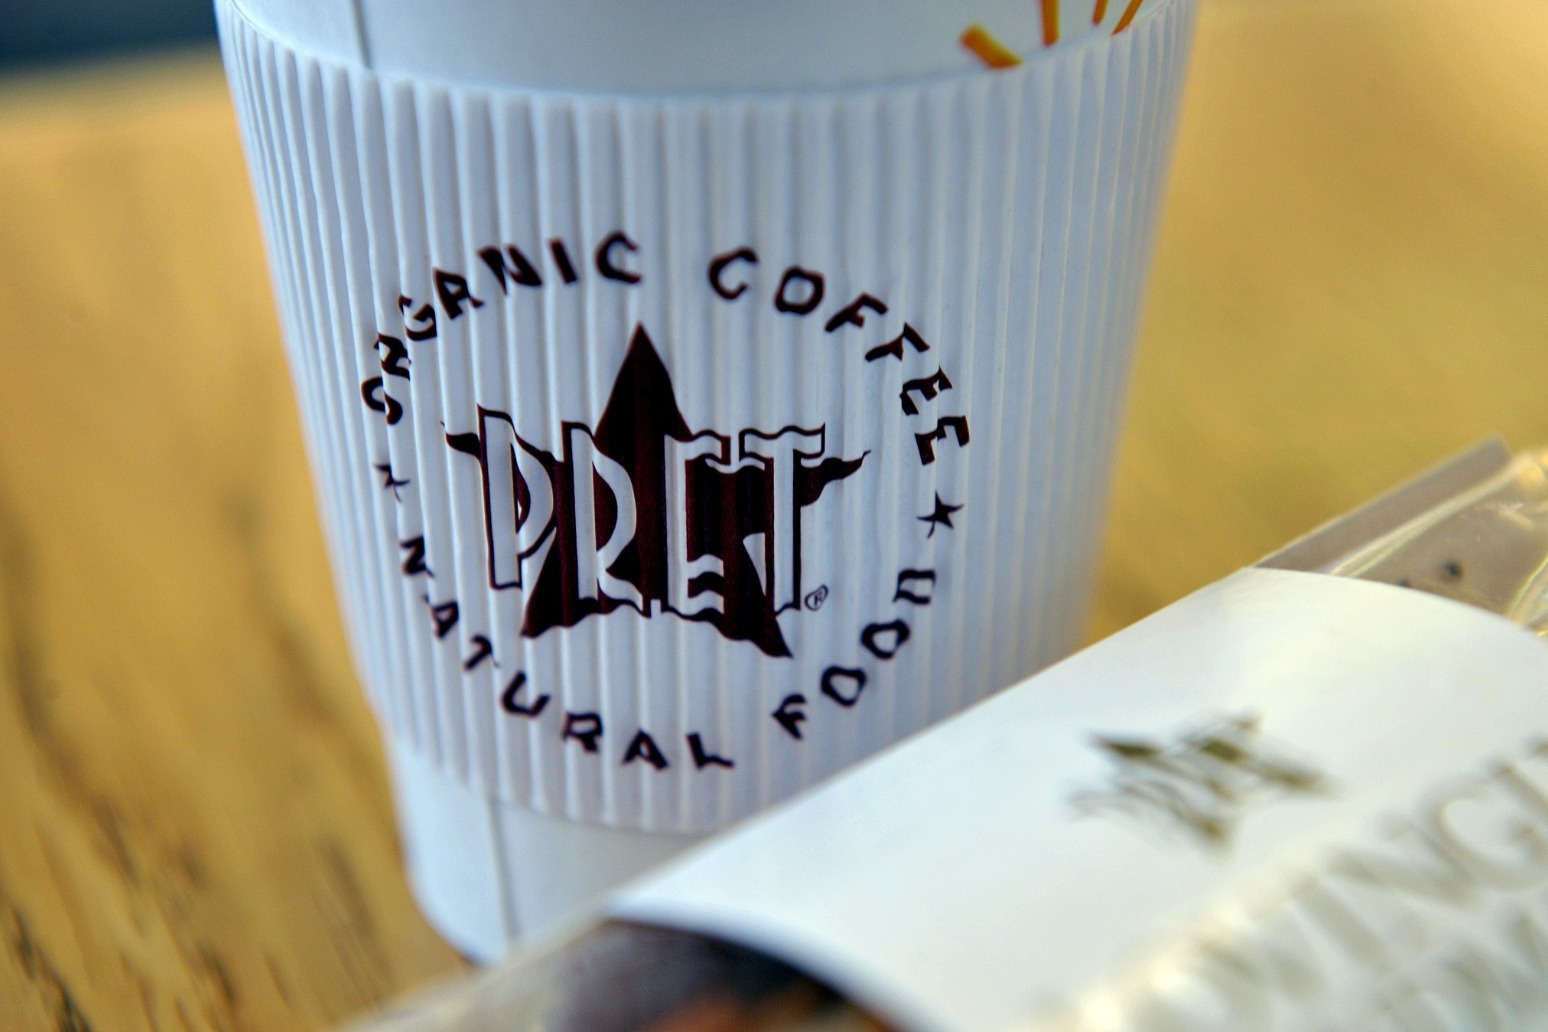 Inquest into death of mother-of-five after eating Pret wrap to begin 